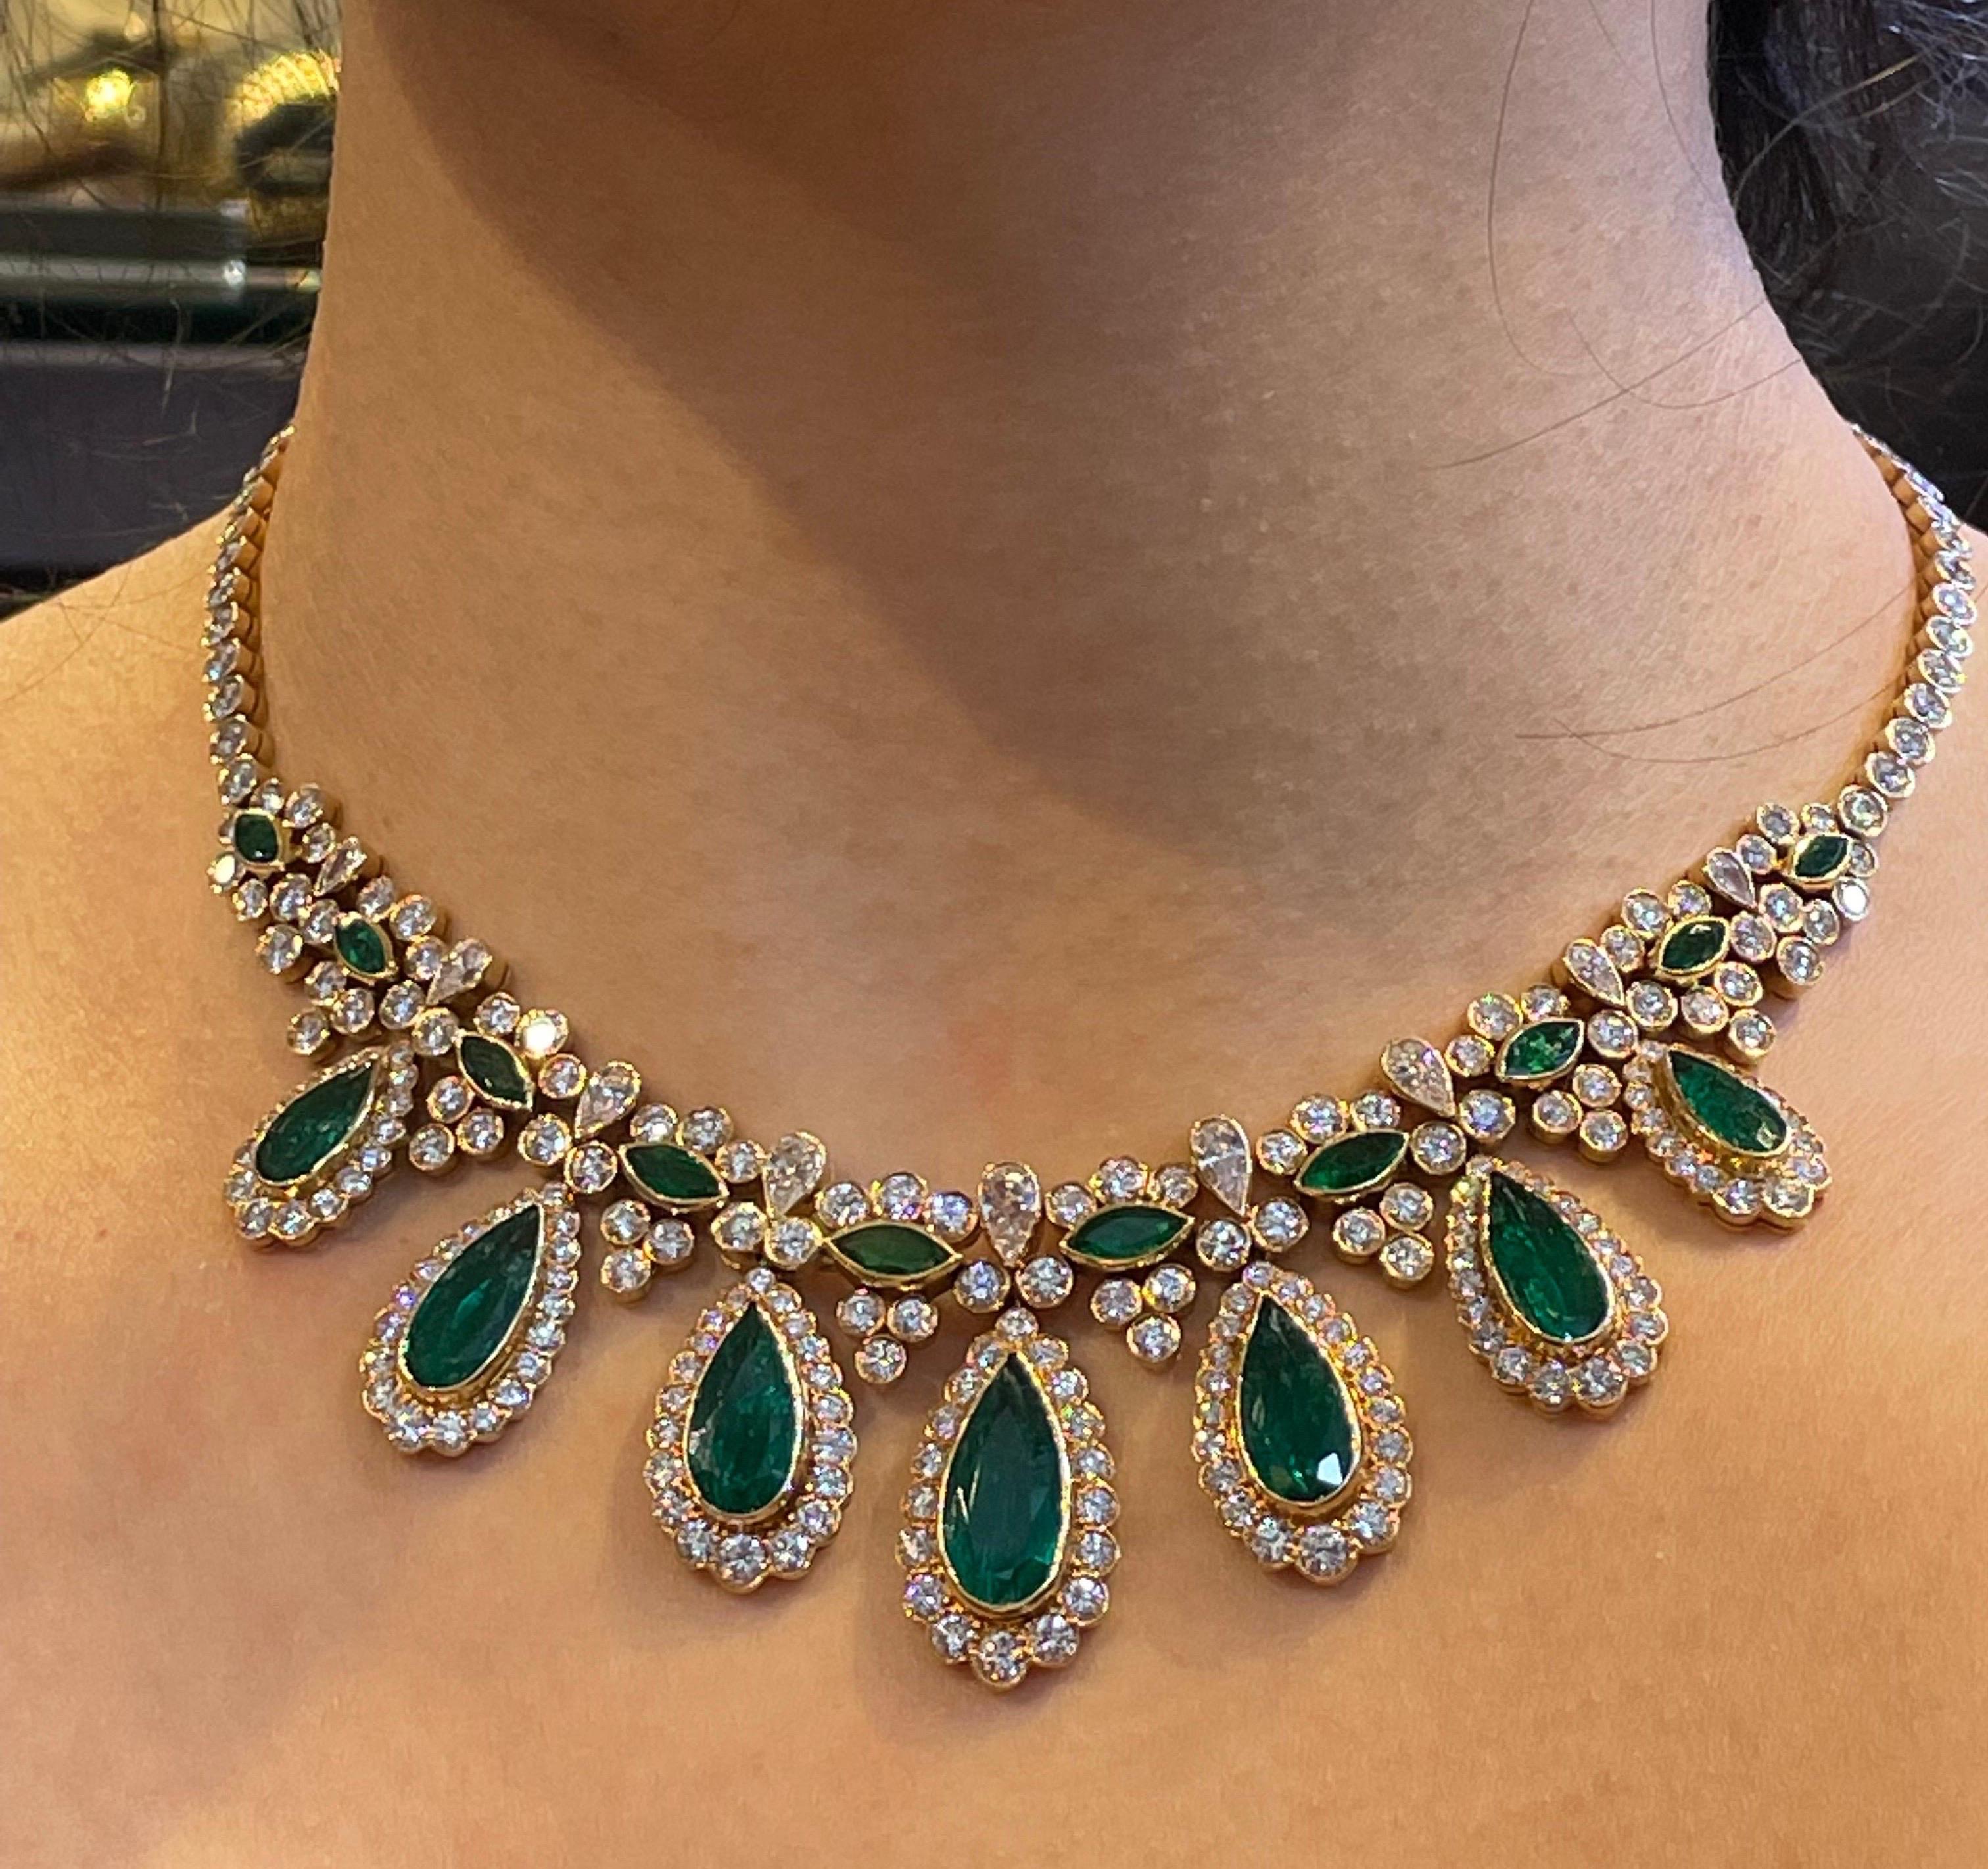 Van Cleef and Arpels Emerald Necklace 

Beautiful Pear Emerald and gold necklace featuring 7 pear shape certified Columbian emeralds. 

Accompanied with a AGL laboratory certificate for the emeralds stating they are of Colombian origin

Gold weight: